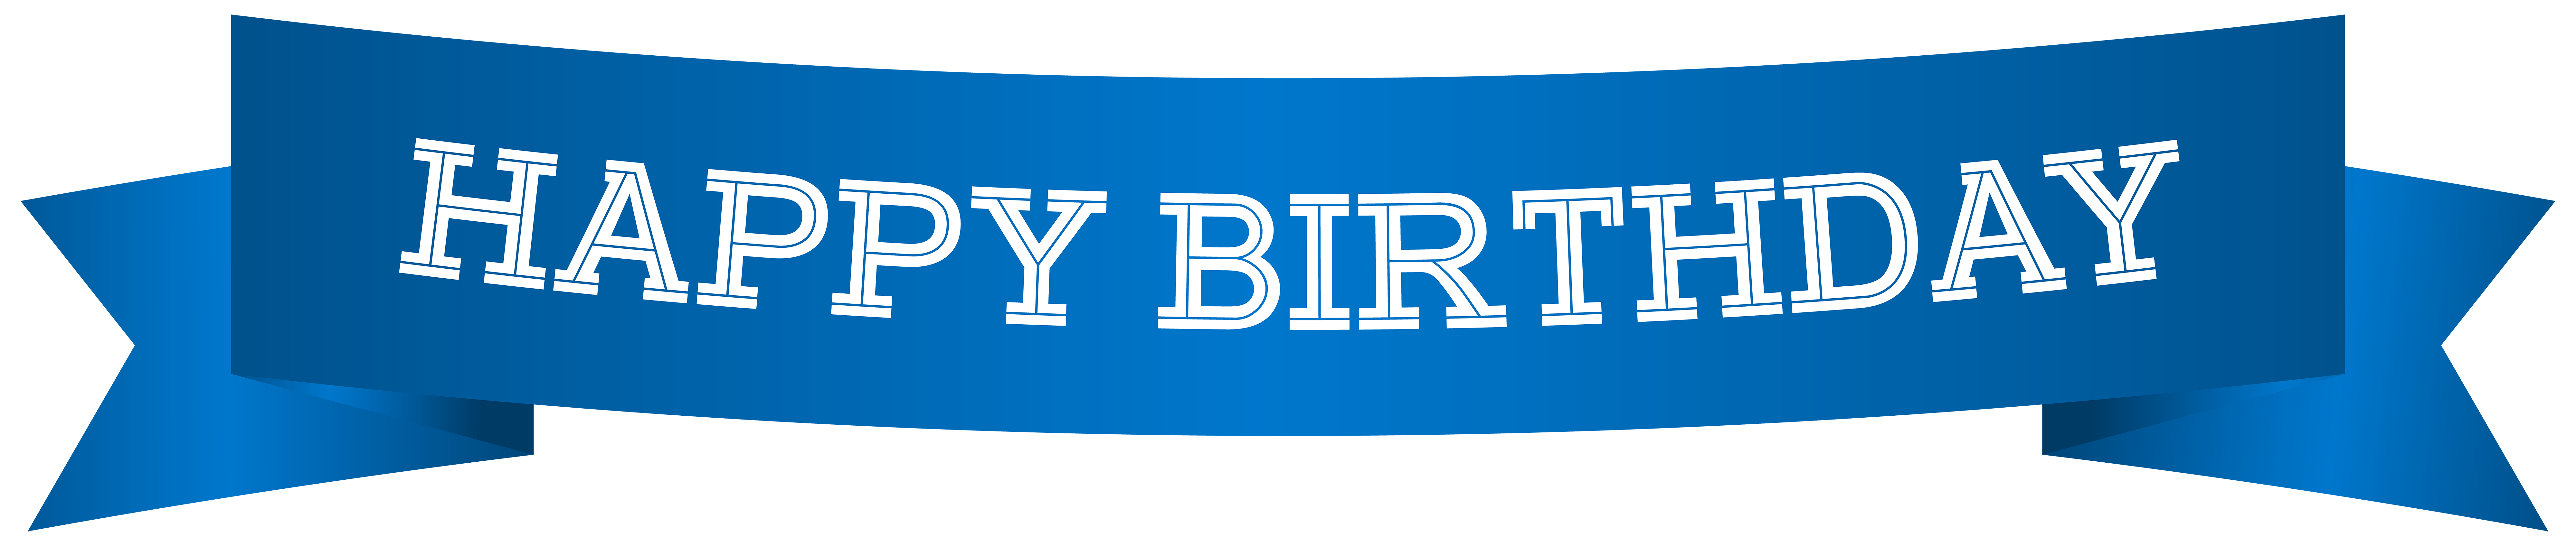 Happy birthday blue png. Pennant clipart party banner